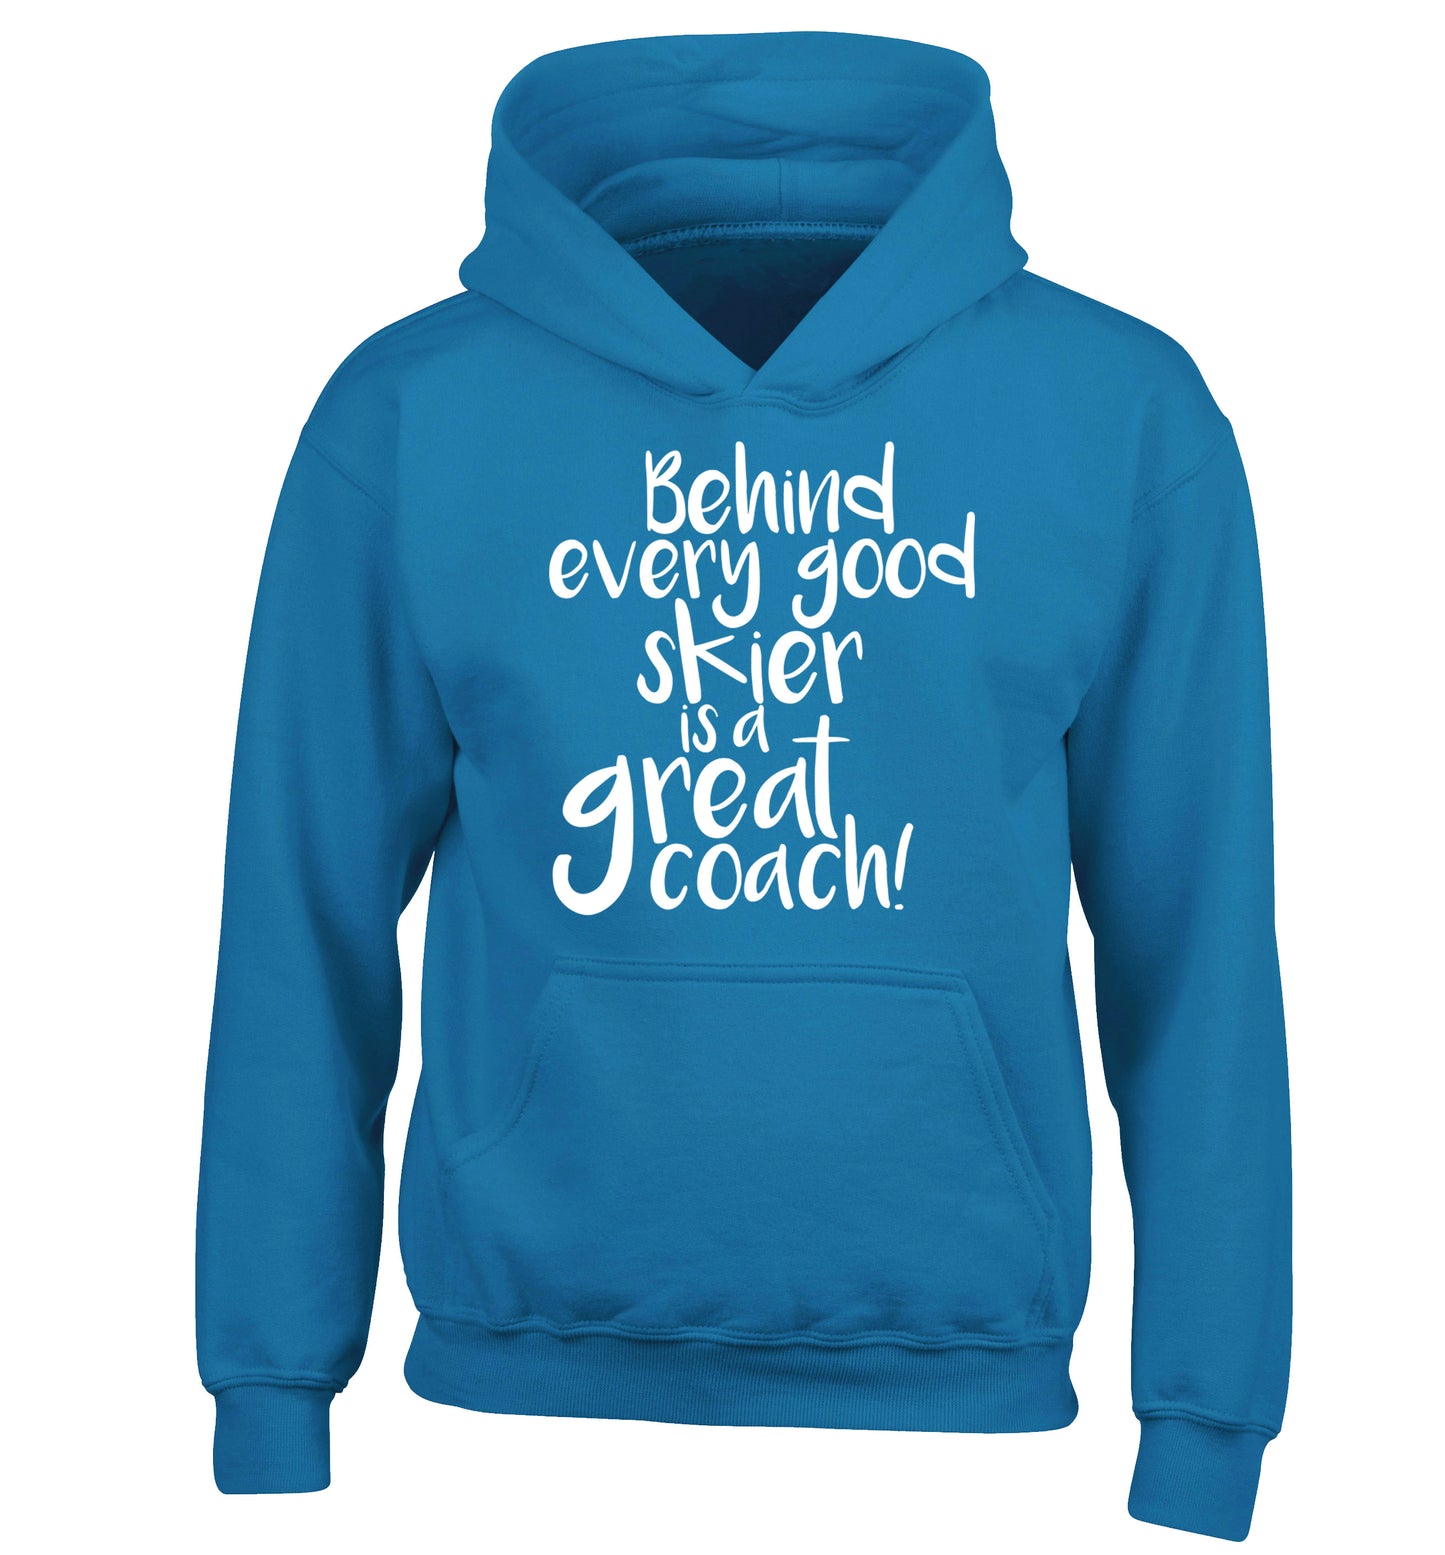 Behind every good skier is a great coach! children's blue hoodie 12-14 Years